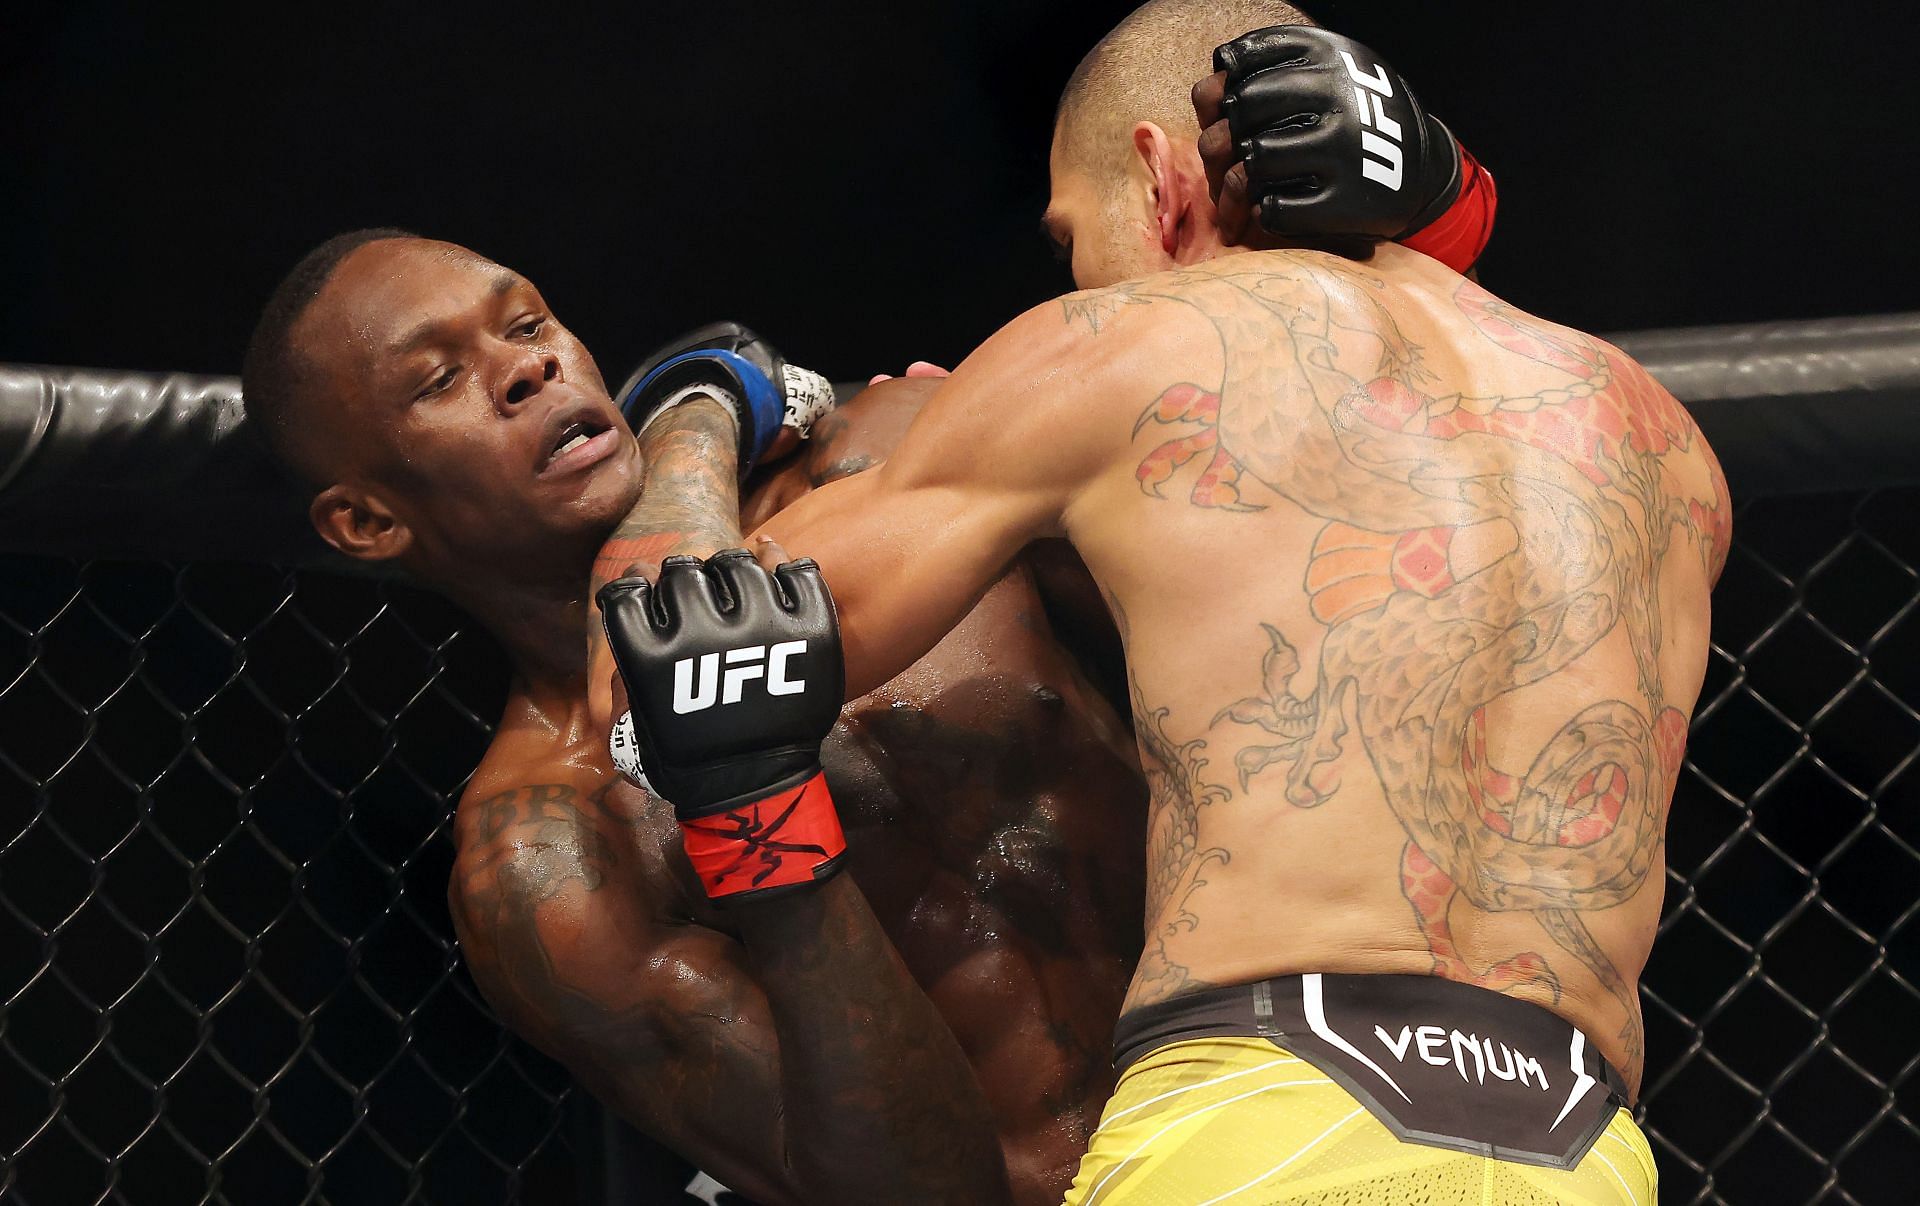 Adding more size and strength could help Israel Adesanya against Alex Pereira in a rematch